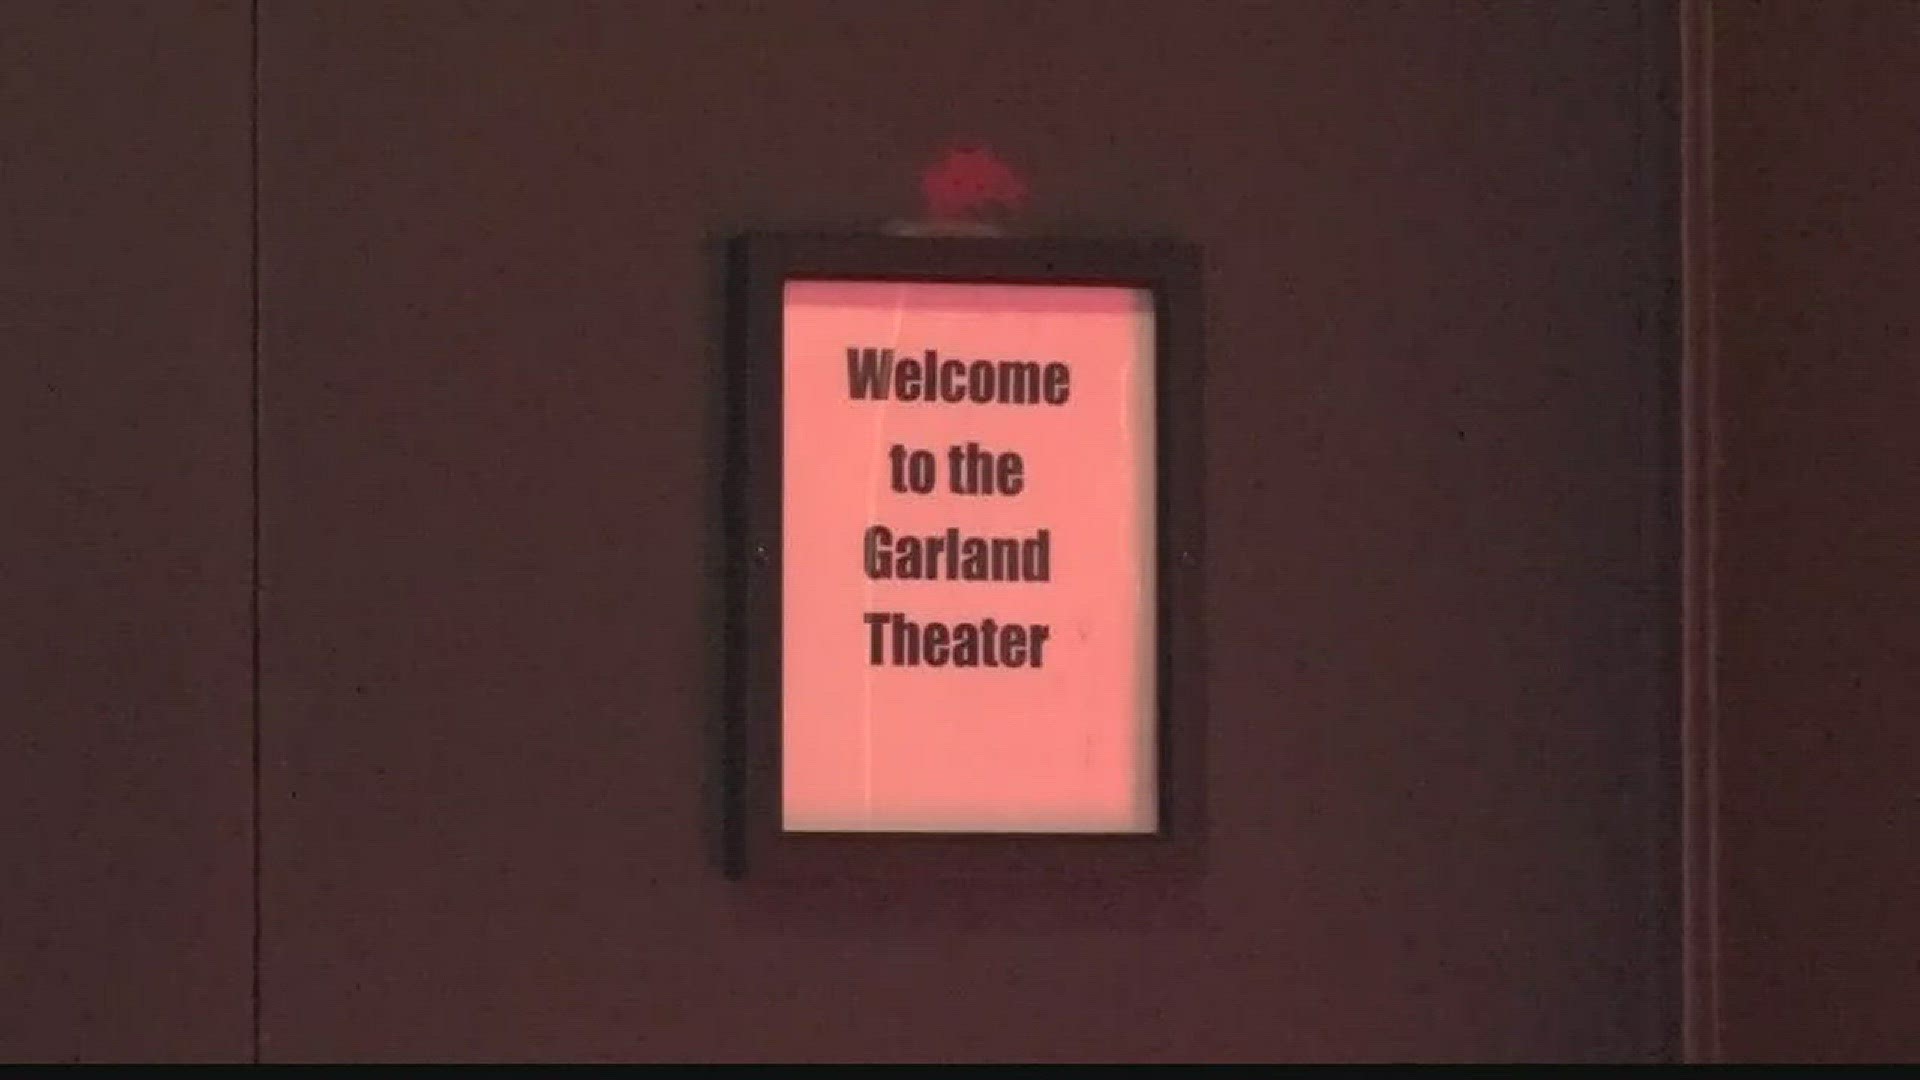 Pornographic film festival showing at Garland Theater